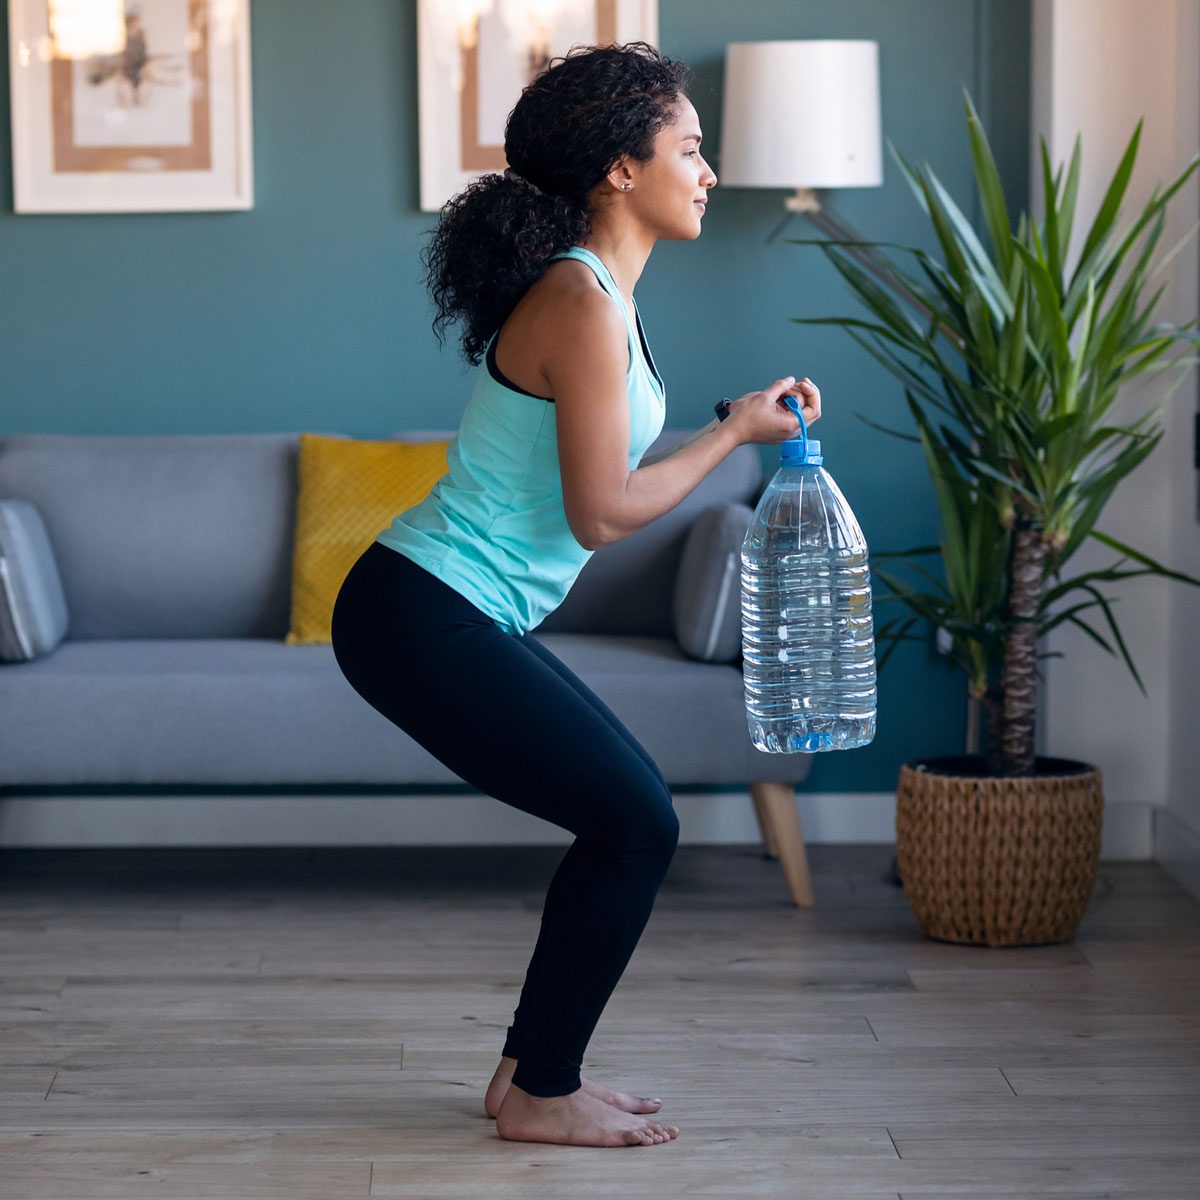 Great equipment for useful home workouts - Reader's Digest